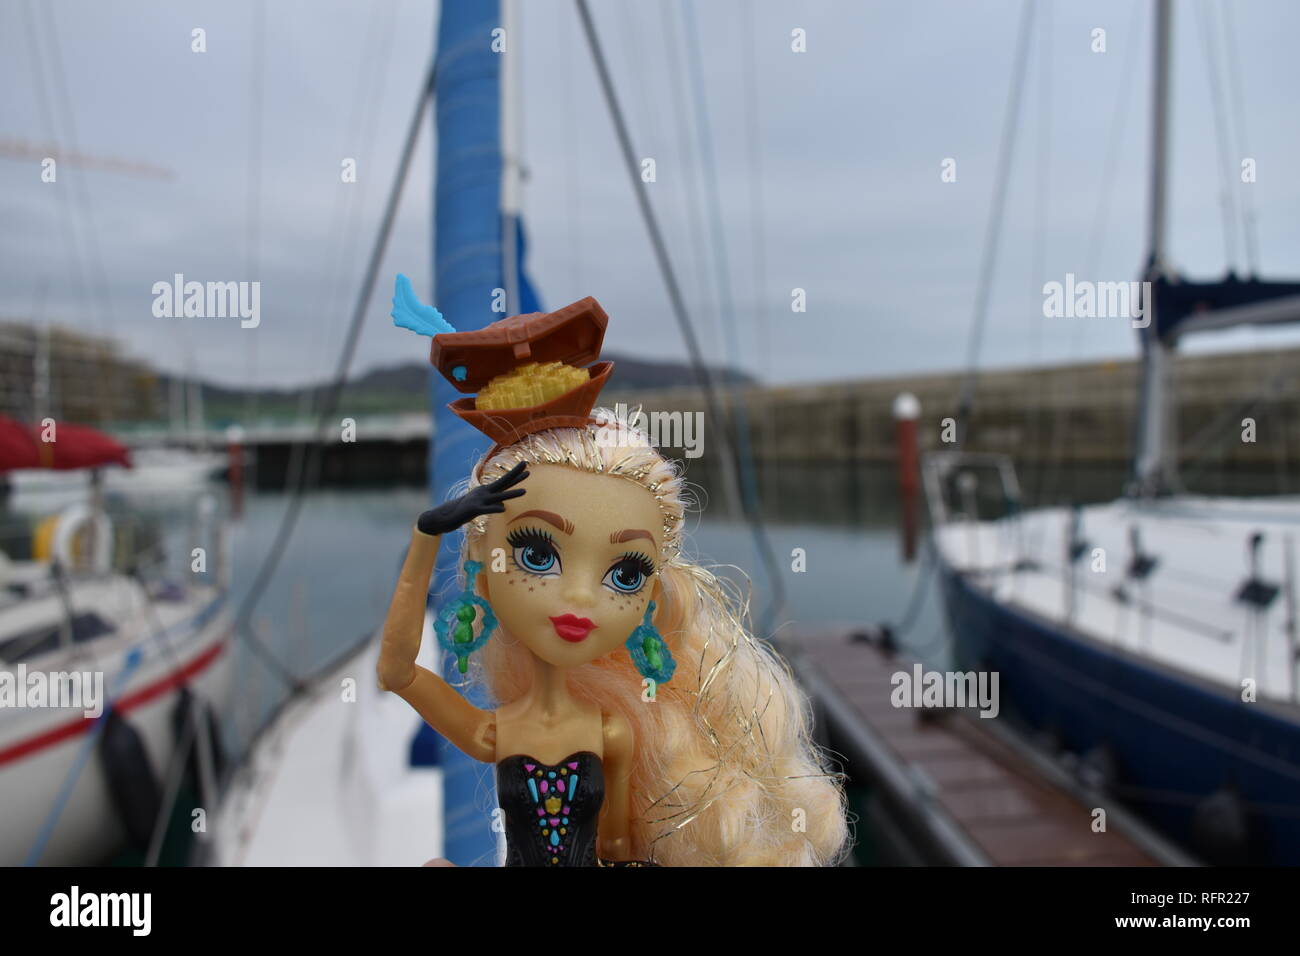 monster high goes to sea Stock Photo